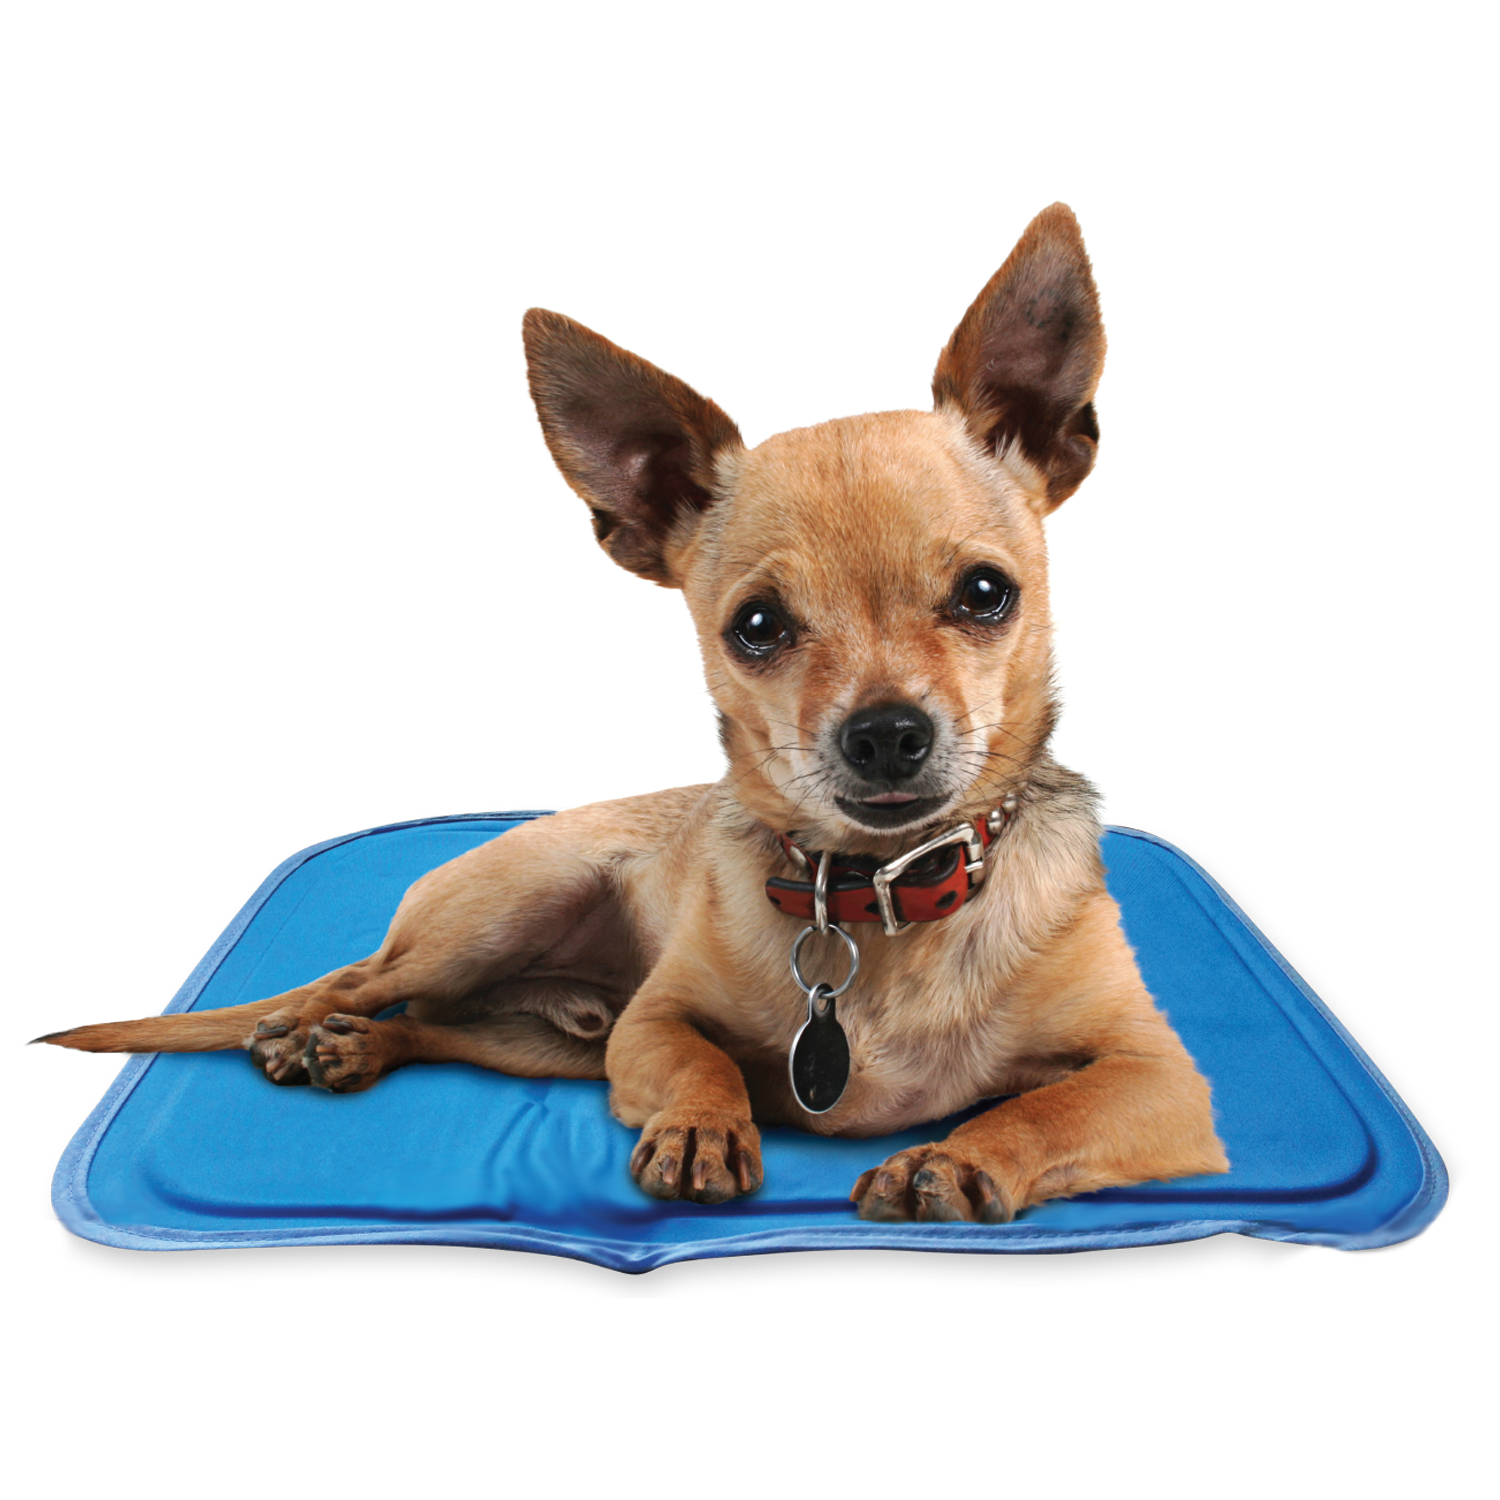 Cool Care Technologies Cool Flash Pillow Pad